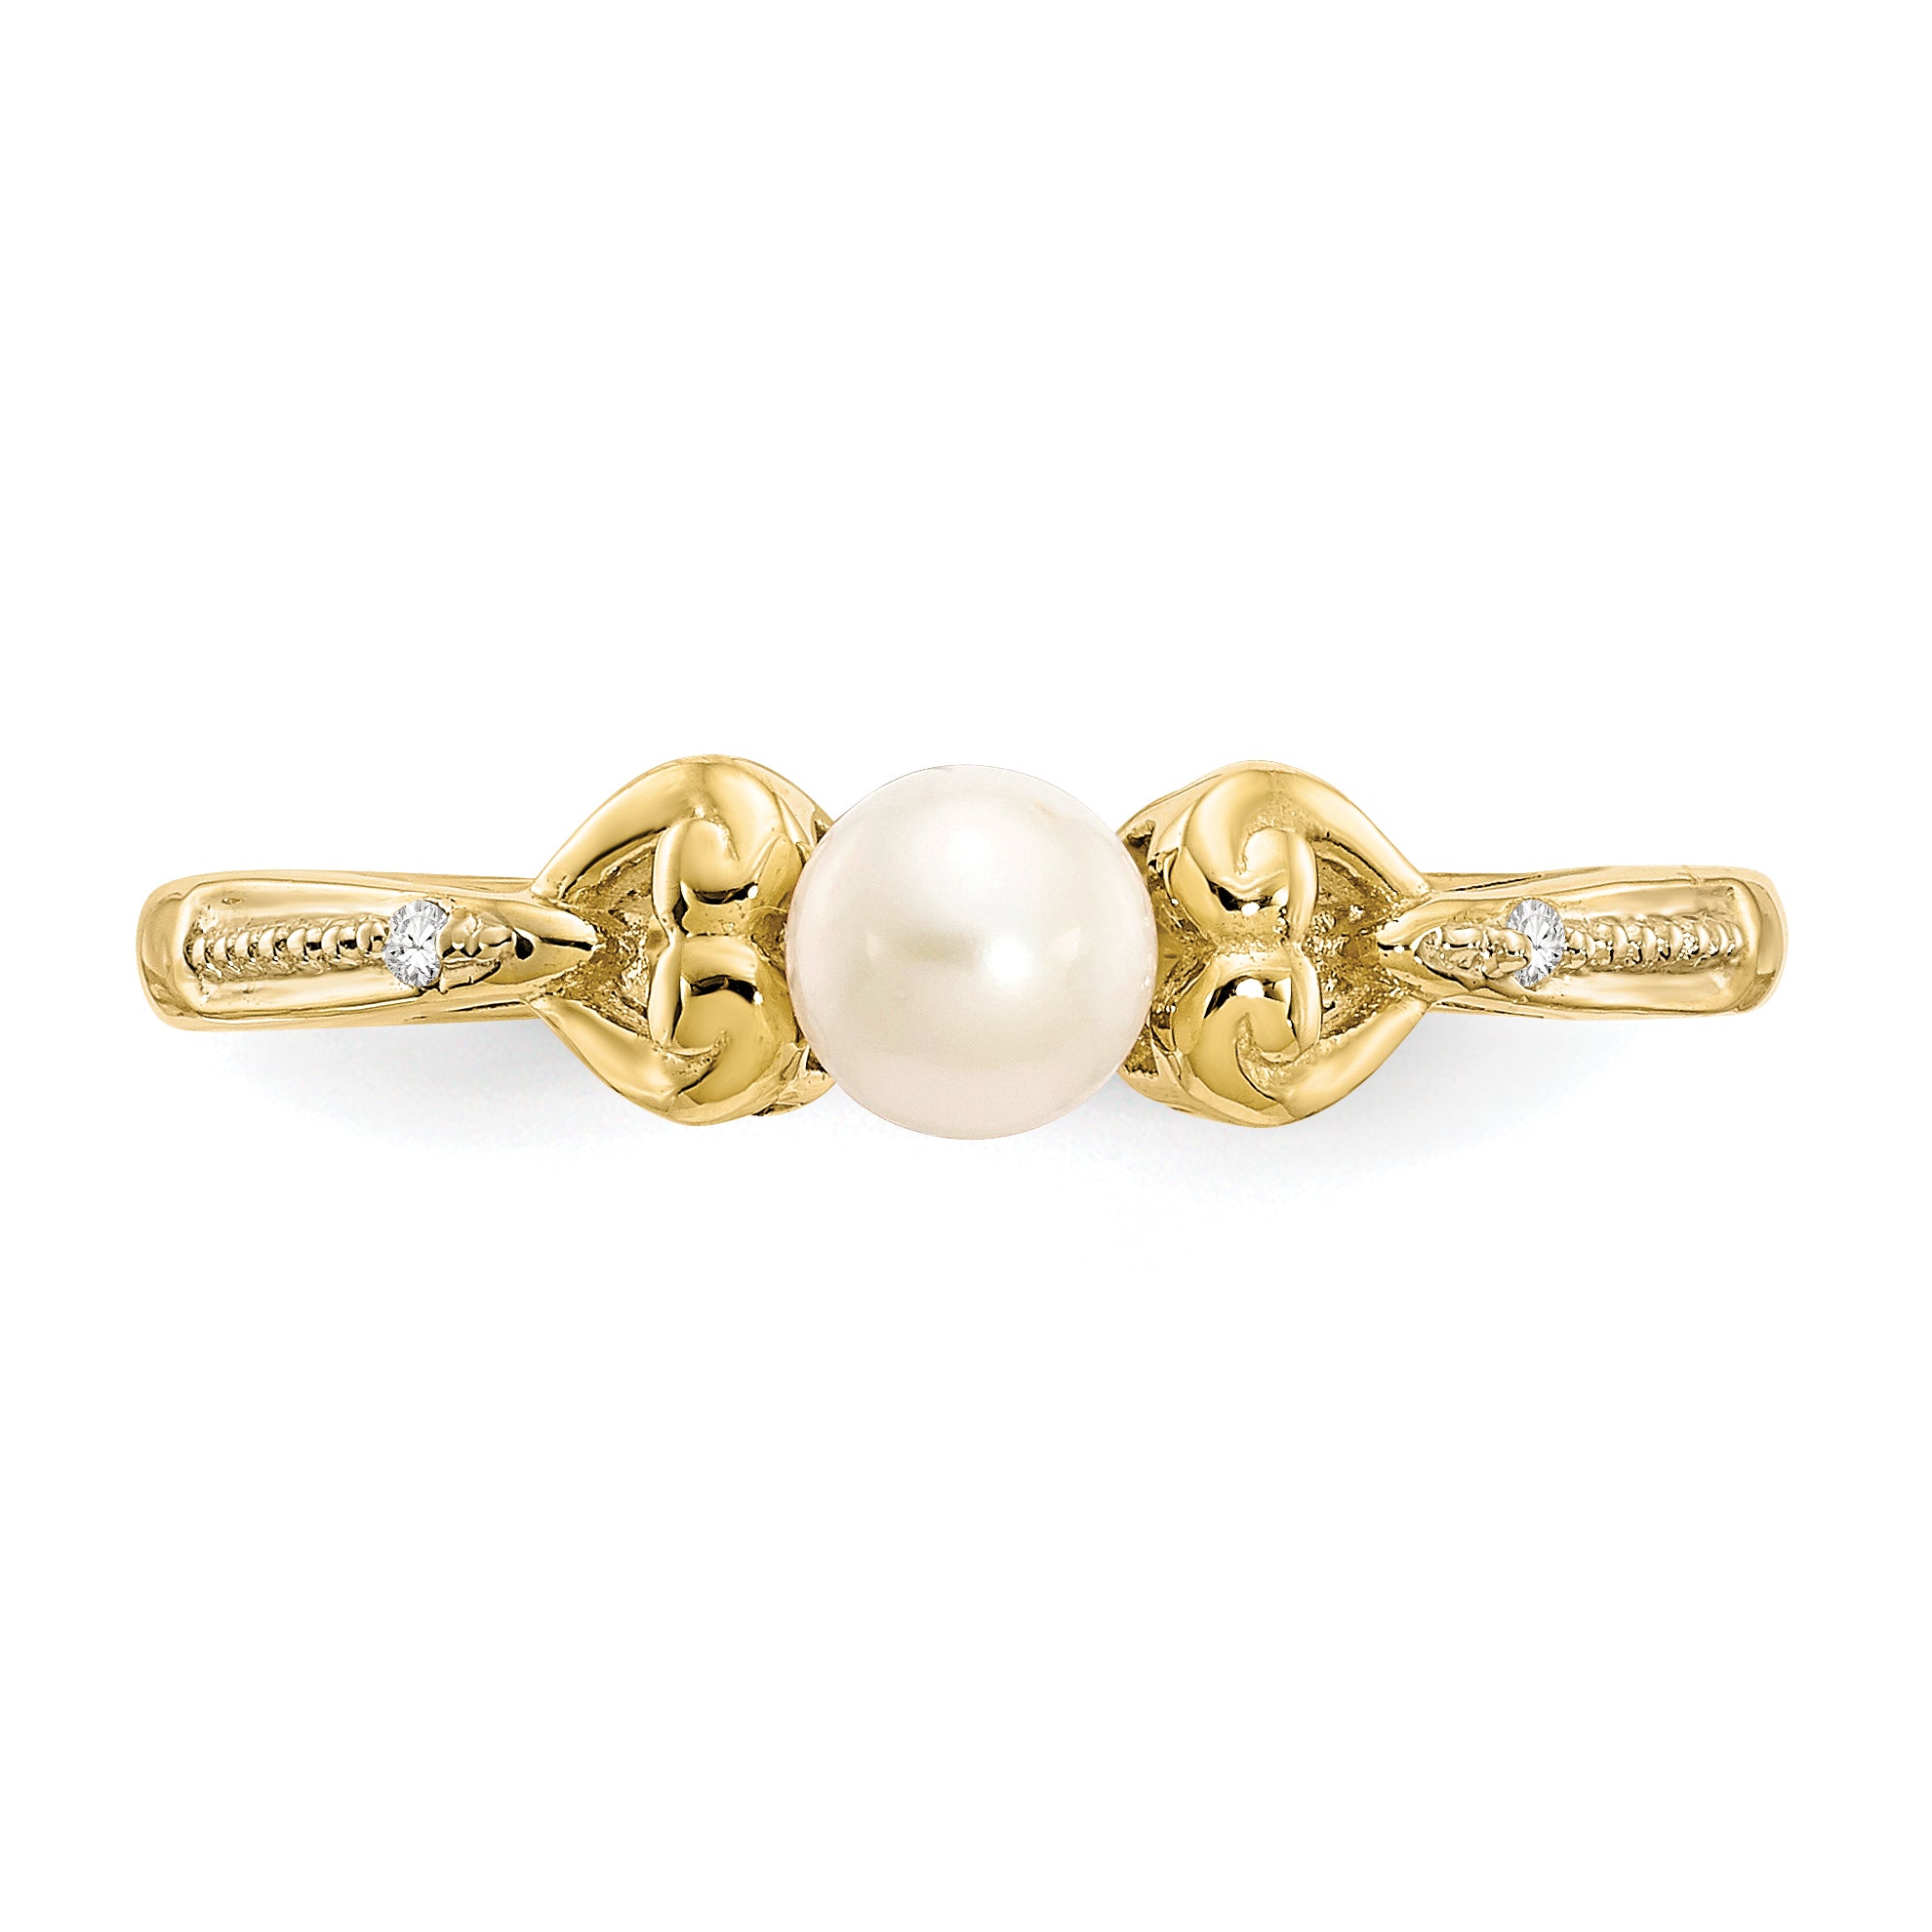 10K Fresh Water Cultured Pearl and Diamond Ring